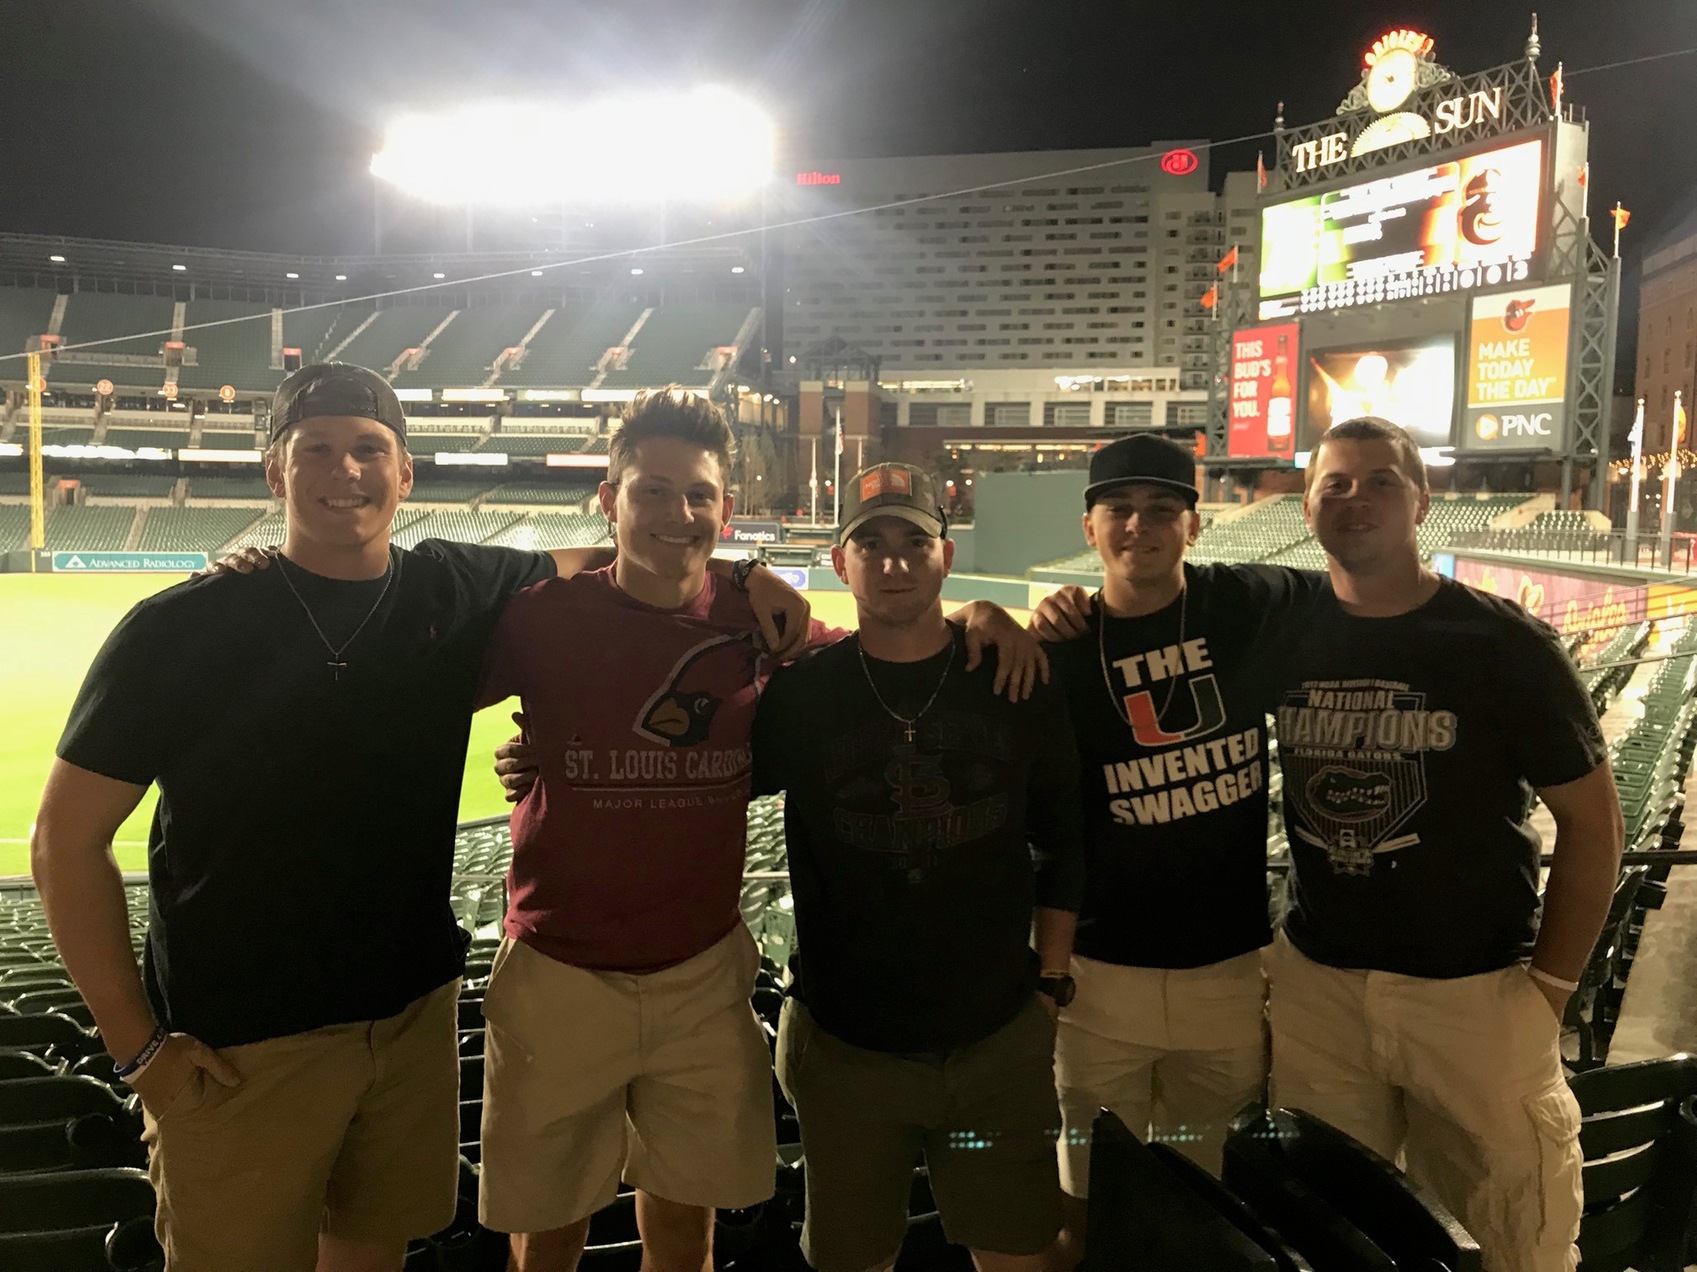 Catamounts attending an O's game at Camden Yards 